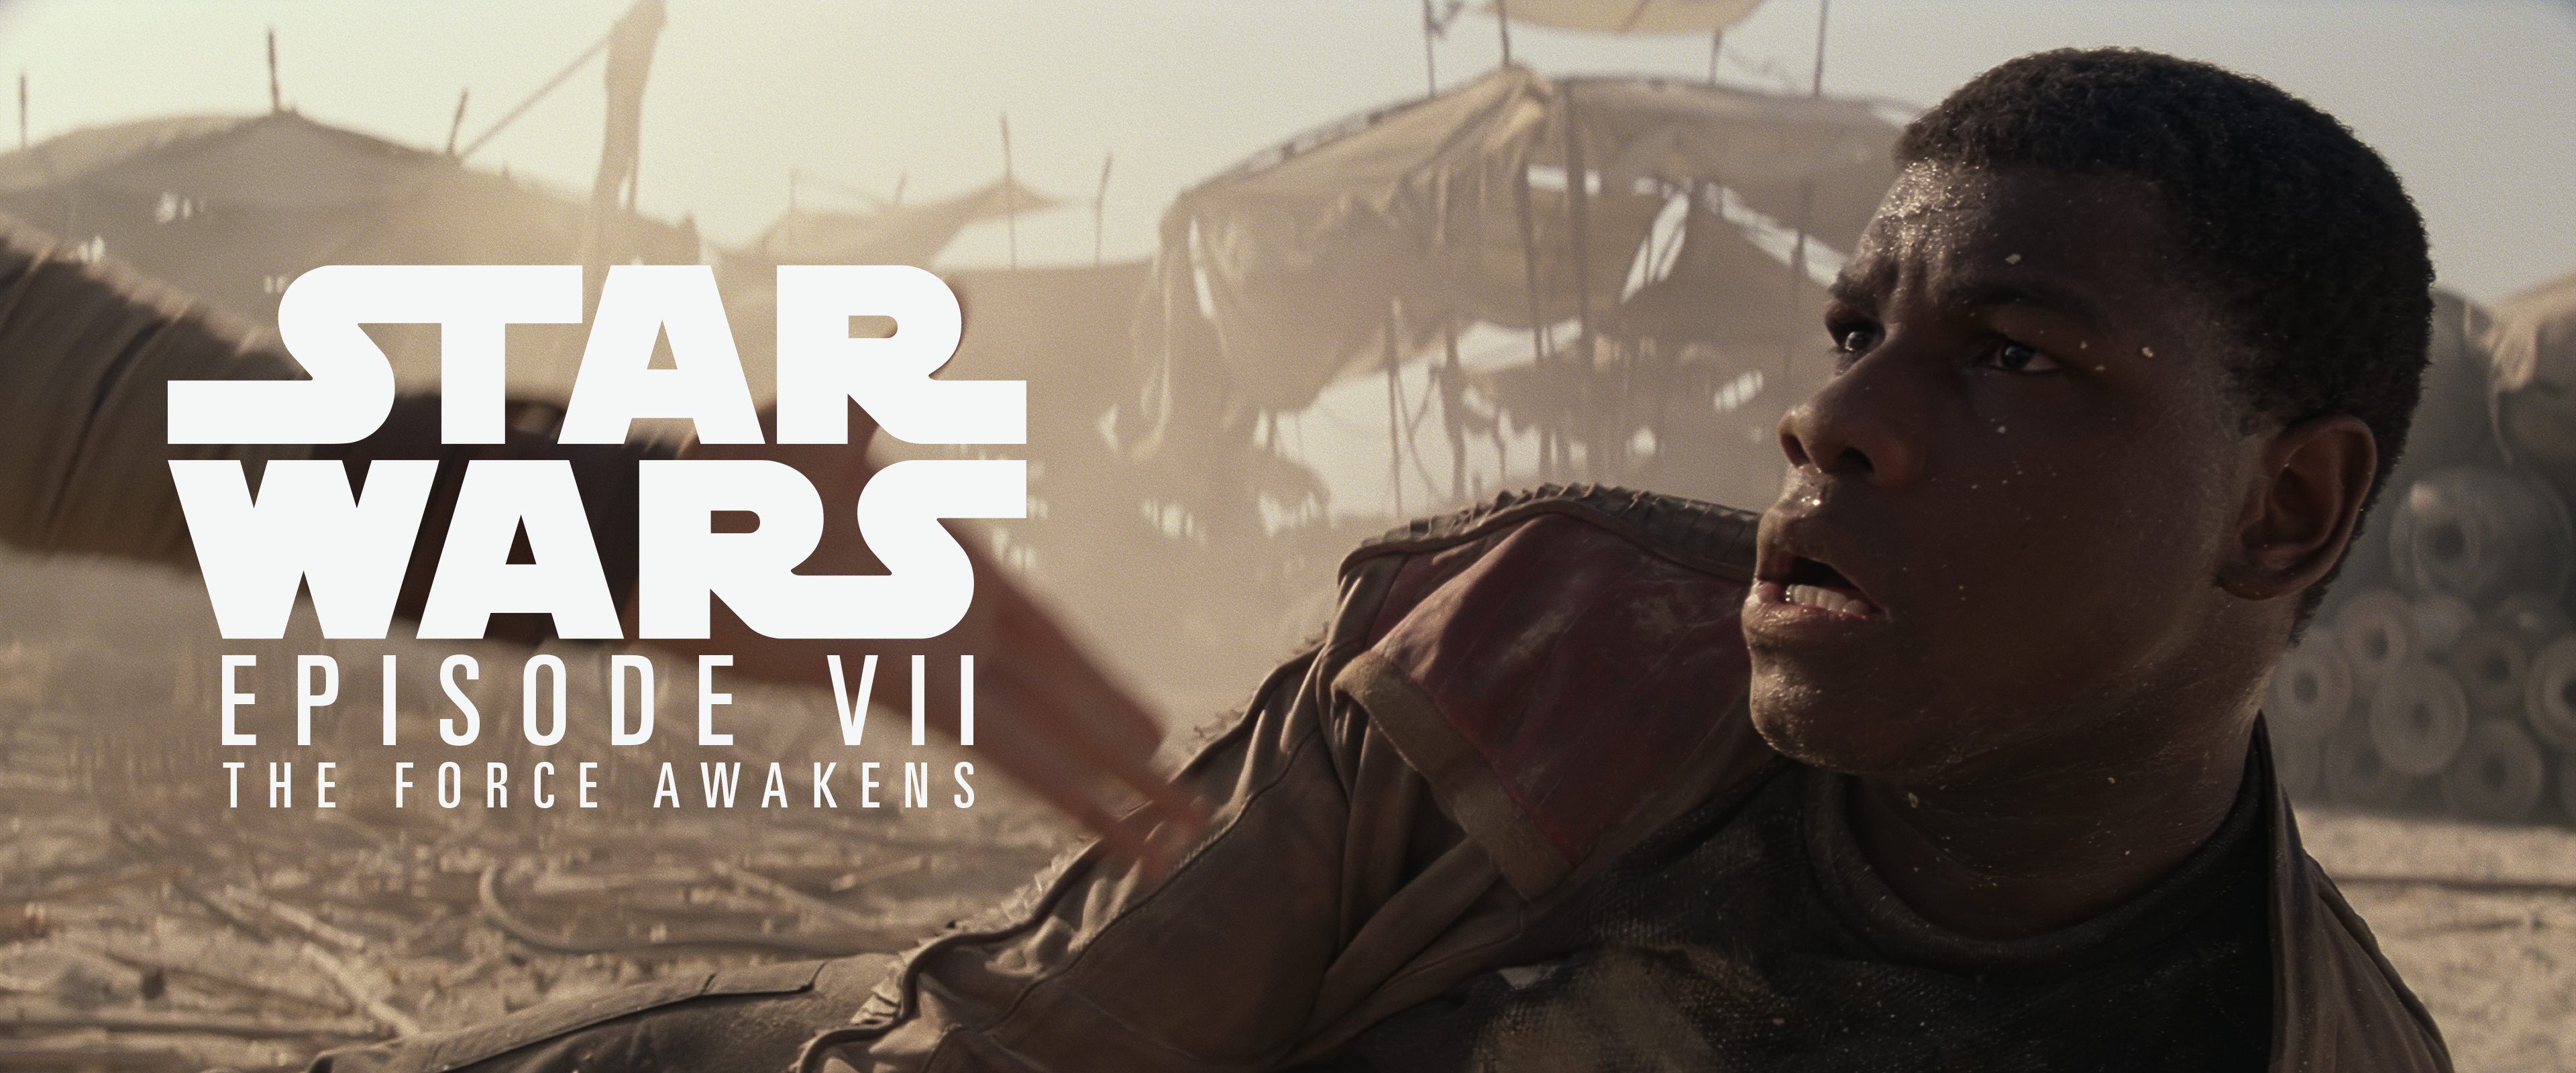 Episode VII: The Force Awakens